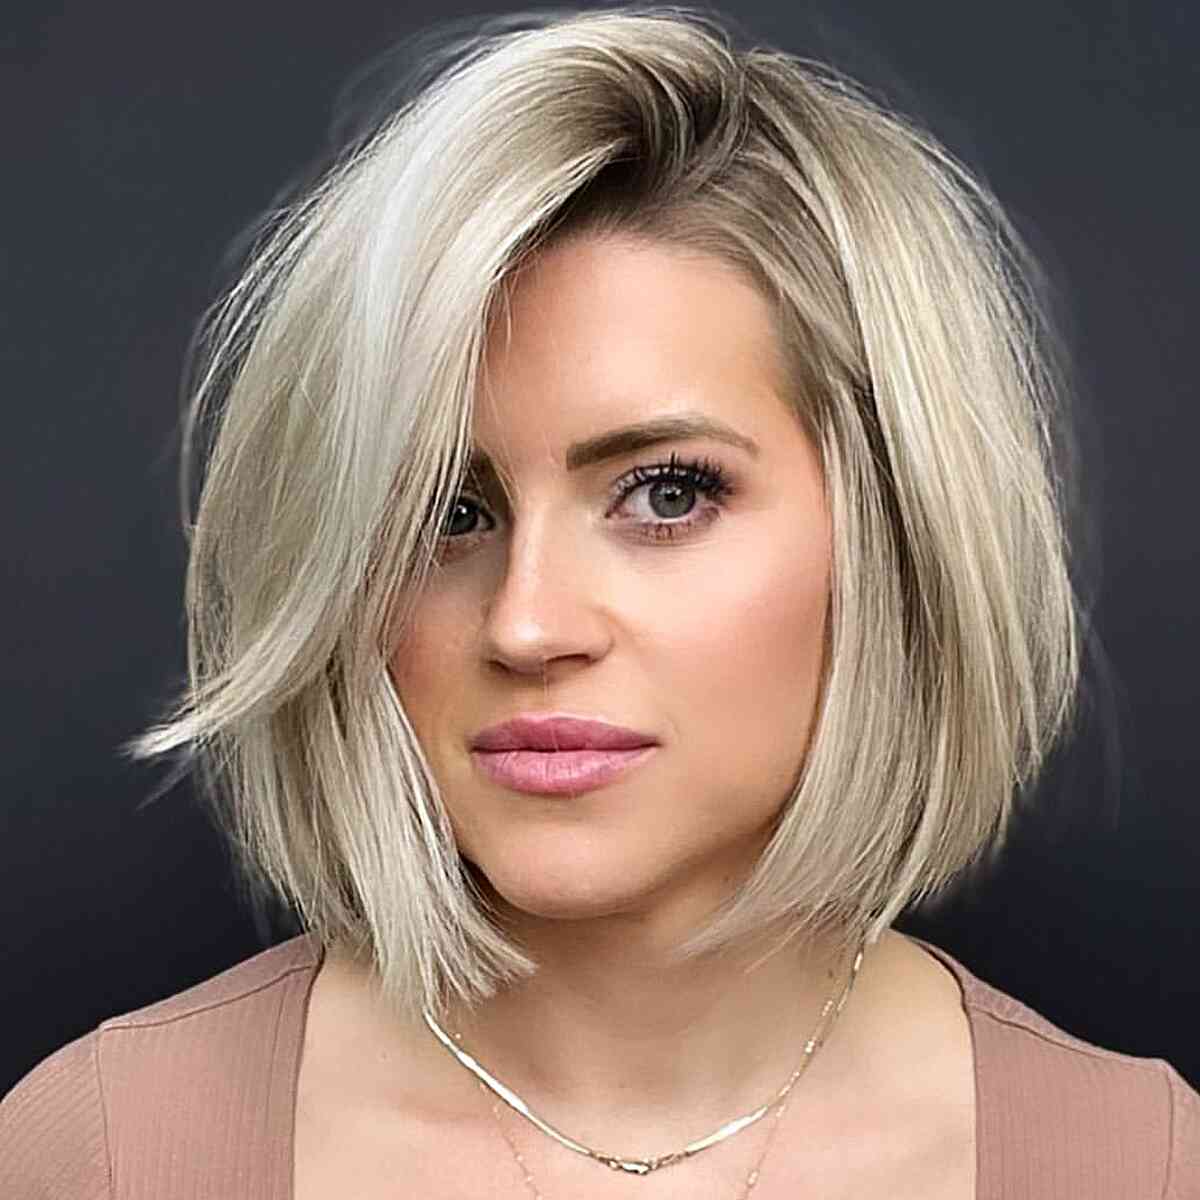 Blunt and Side Parted Reversible Bob Cut for women with soft blonde hair